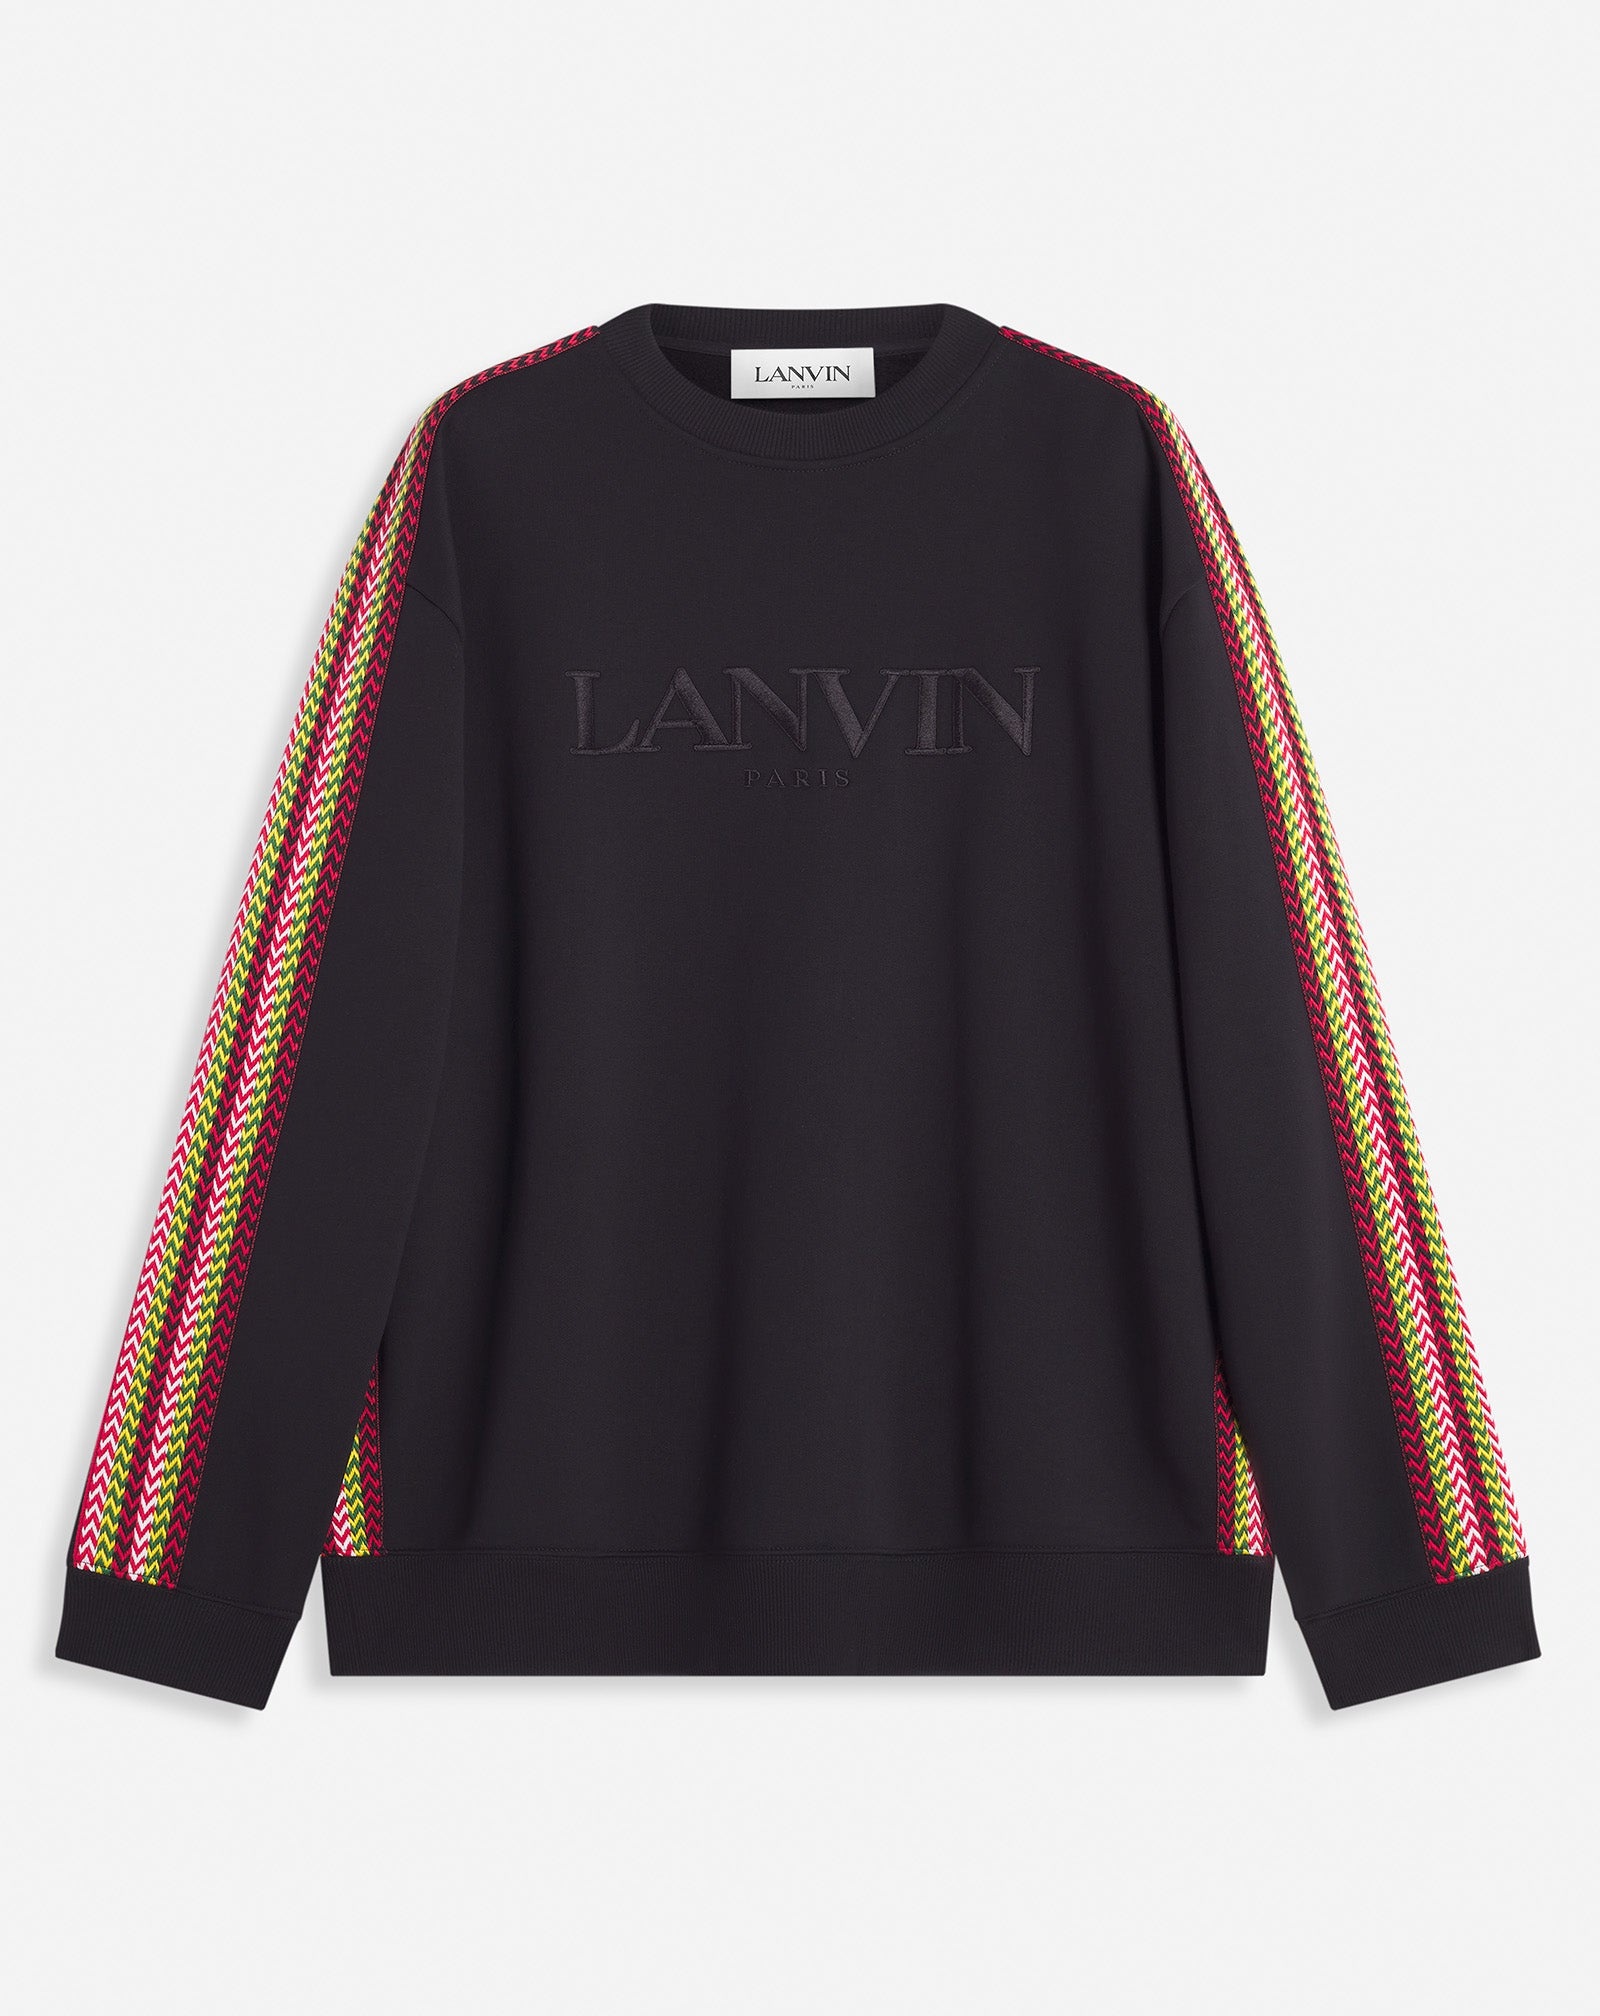 OVERSIZED LANVIN EMBROIDERED SIDE CURB SWEATSHIRT - 1